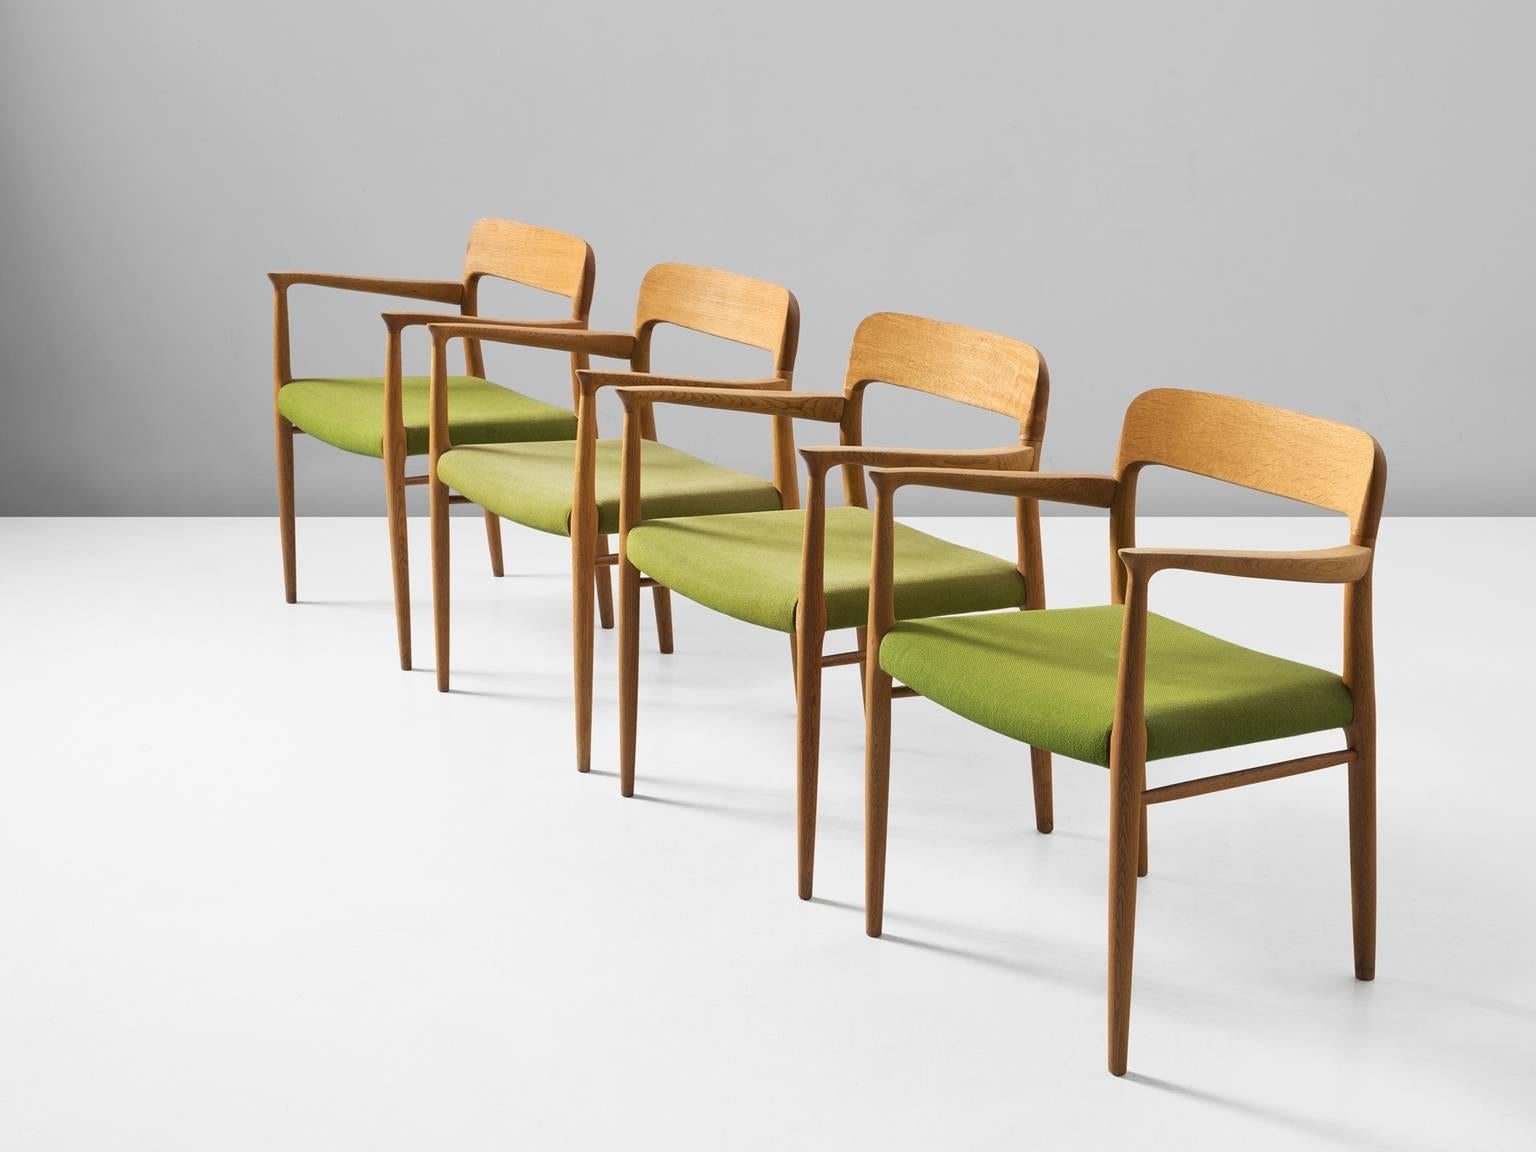 Set of two dining chairs model 56, in oak and fabric, by Niels Otto Møller for J. L. Møller, Denmark, 1954. 
 
This set of chairs shows subtle lines and beautiful curves of the woodwork.
In the highly refined connections of the wood you can see the